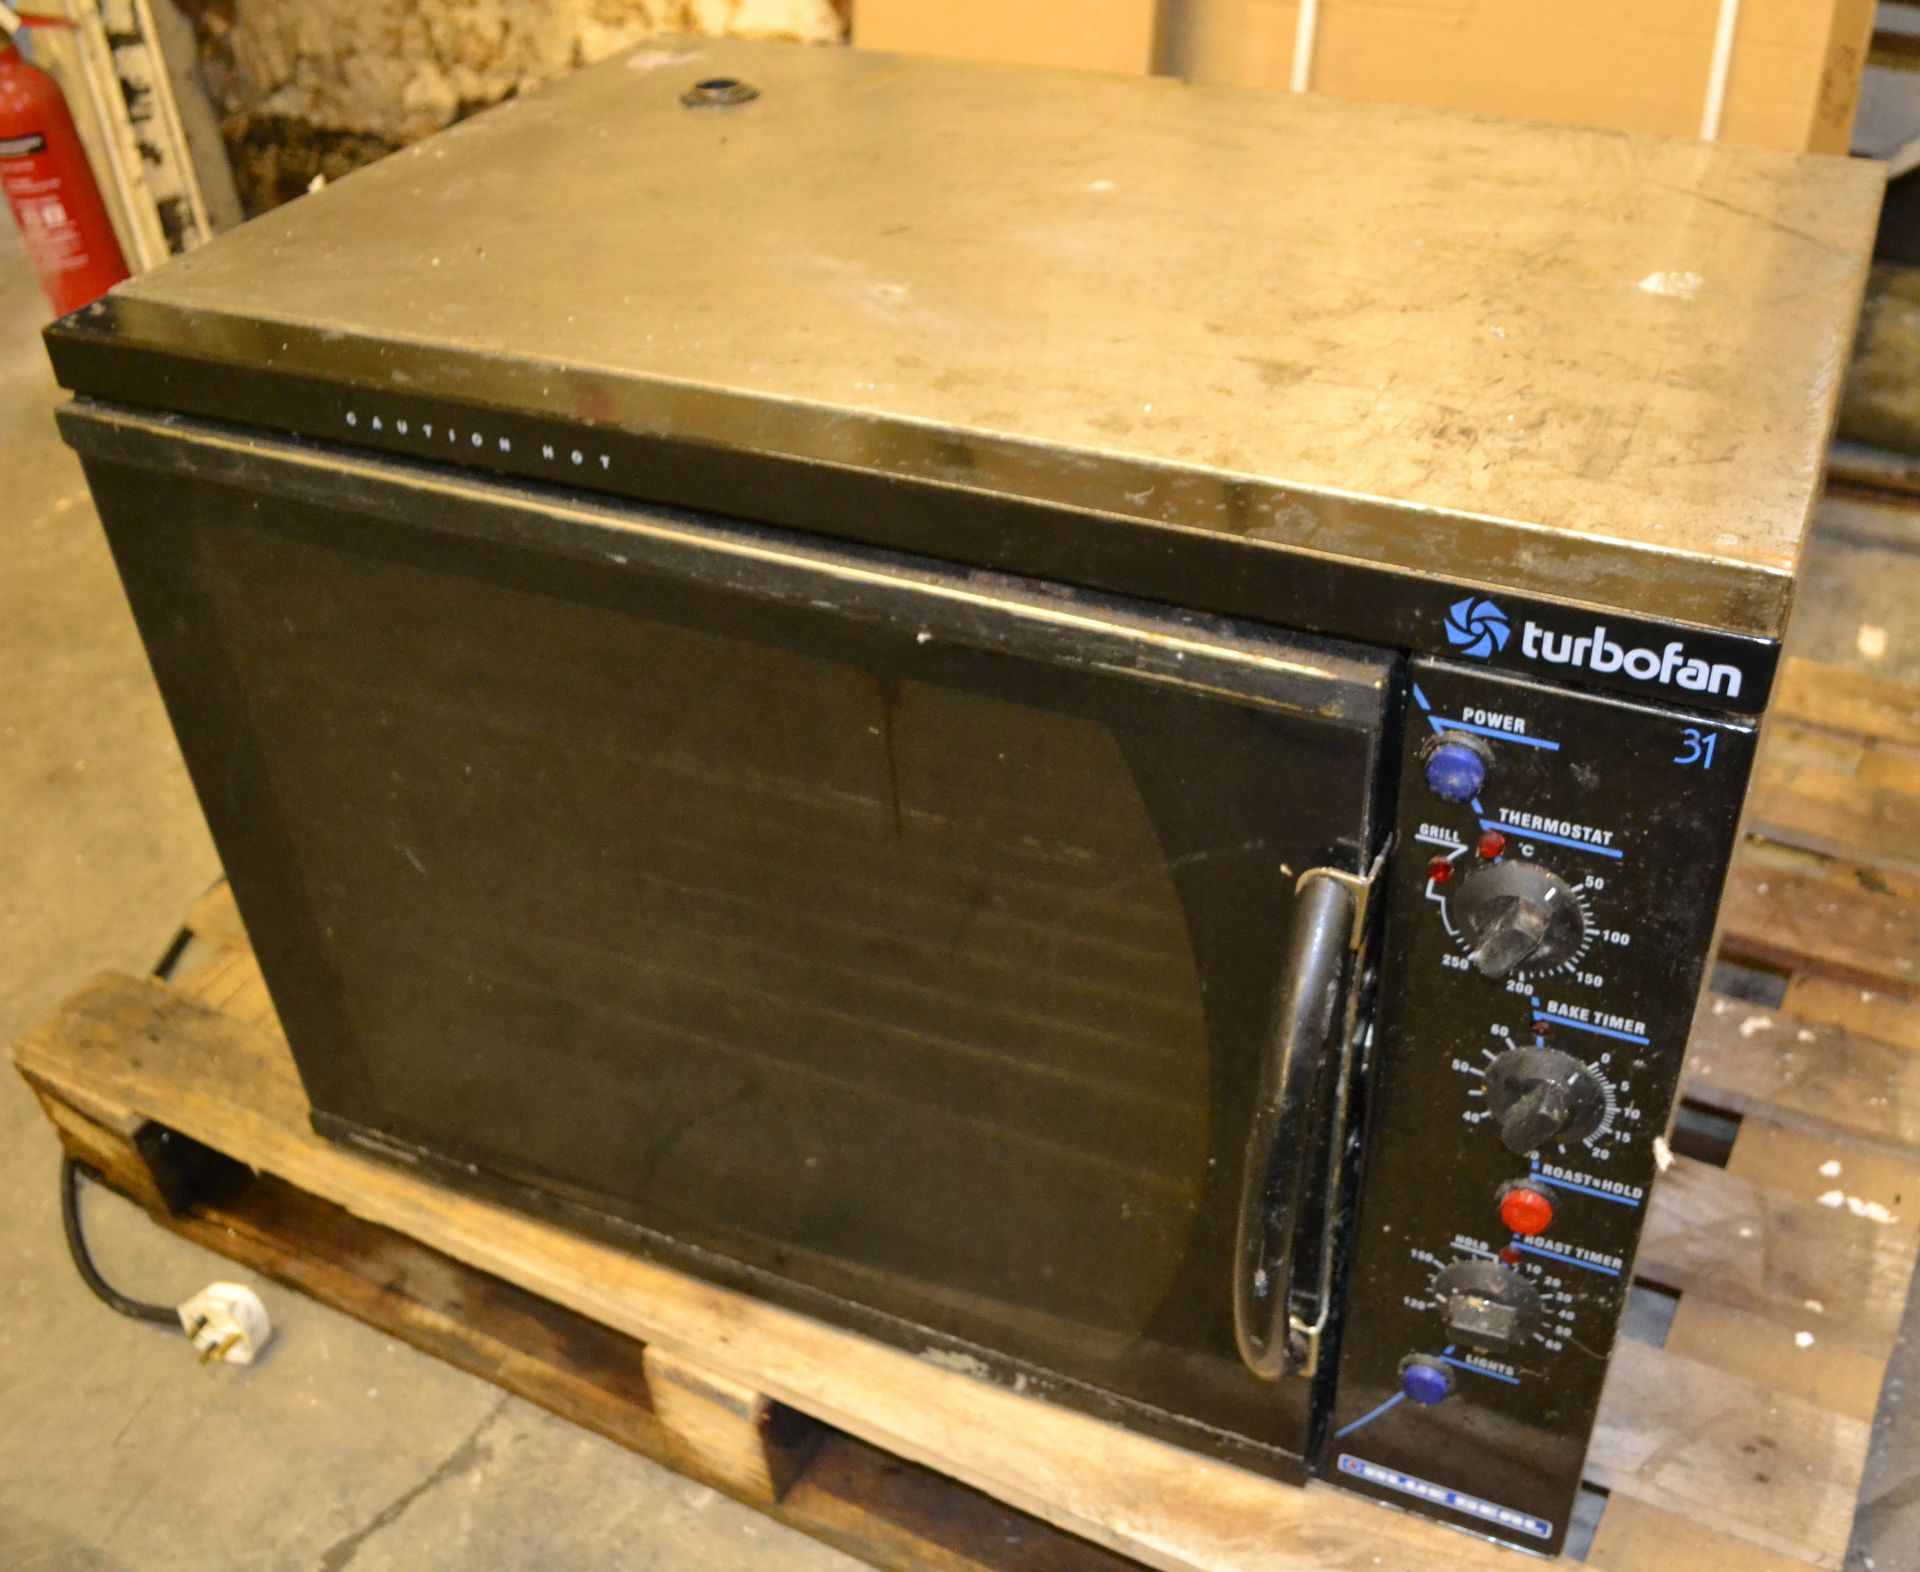 1 x Blue Seal E31 Turbofan Convection Oven - Ref: FJC012 - CL124 - Location: Bolton BL1 - Used Condi - Image 6 of 7